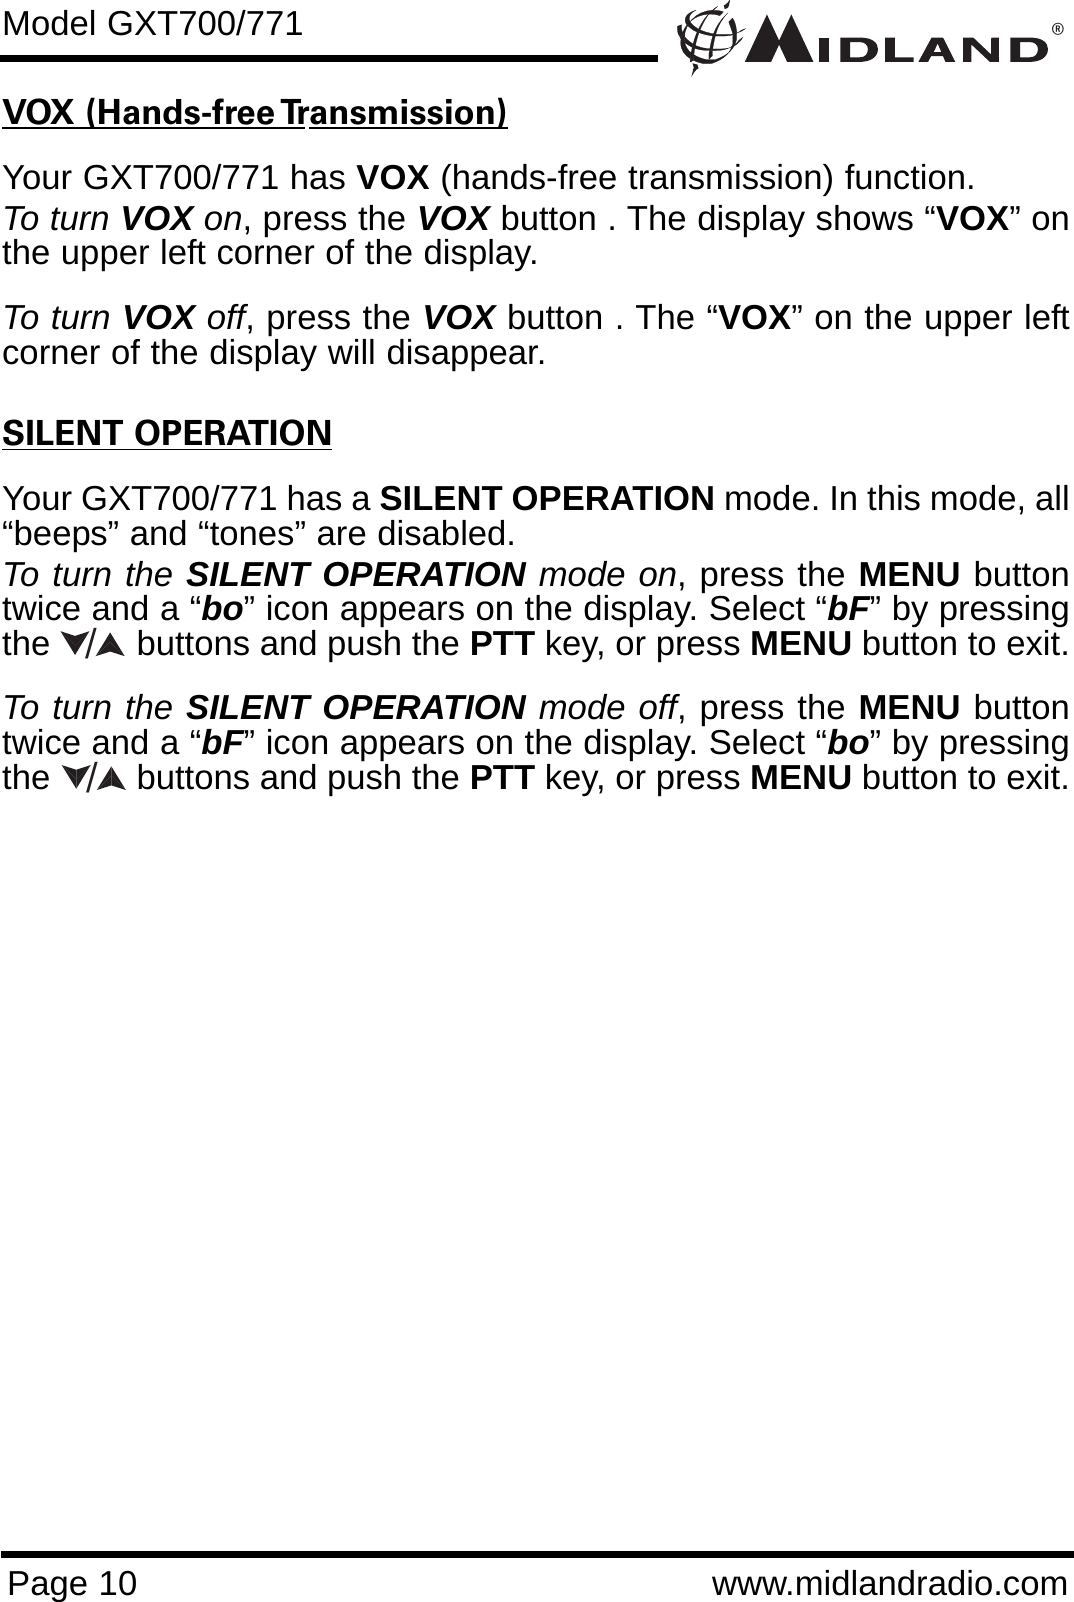 ®Page 10 www.midlandradio.comVOX (Hands-free Transmission)Your GXT700/771 has VOX (hands-free transmission) function.To turn VOX on, press the VOX button . The display shows “VOX” onthe upper left corner of the display.   To turn VOX off, press the VOX button . The “VOX” on the upper leftcorner of the display will disappear.SILENT OPERATIONYour GXT700/771 has a SILENT OPERATION mode. In this mode, all“beeps” and “tones” are disabled. To turn the SILENT OPERATION mode on, press the MENU buttontwice and a “bo” icon appears on the display. Select “bF” by pressingthe         buttons and push the PTT key, or press MENU button to exit. To turn the SILENT OPERATION mode off, press the MENU buttontwice and a “bF” icon appears on the display. Select “bo” by pressingthe         buttons and push the PTT key, or press MENU button to exit.Model GXT700/771//